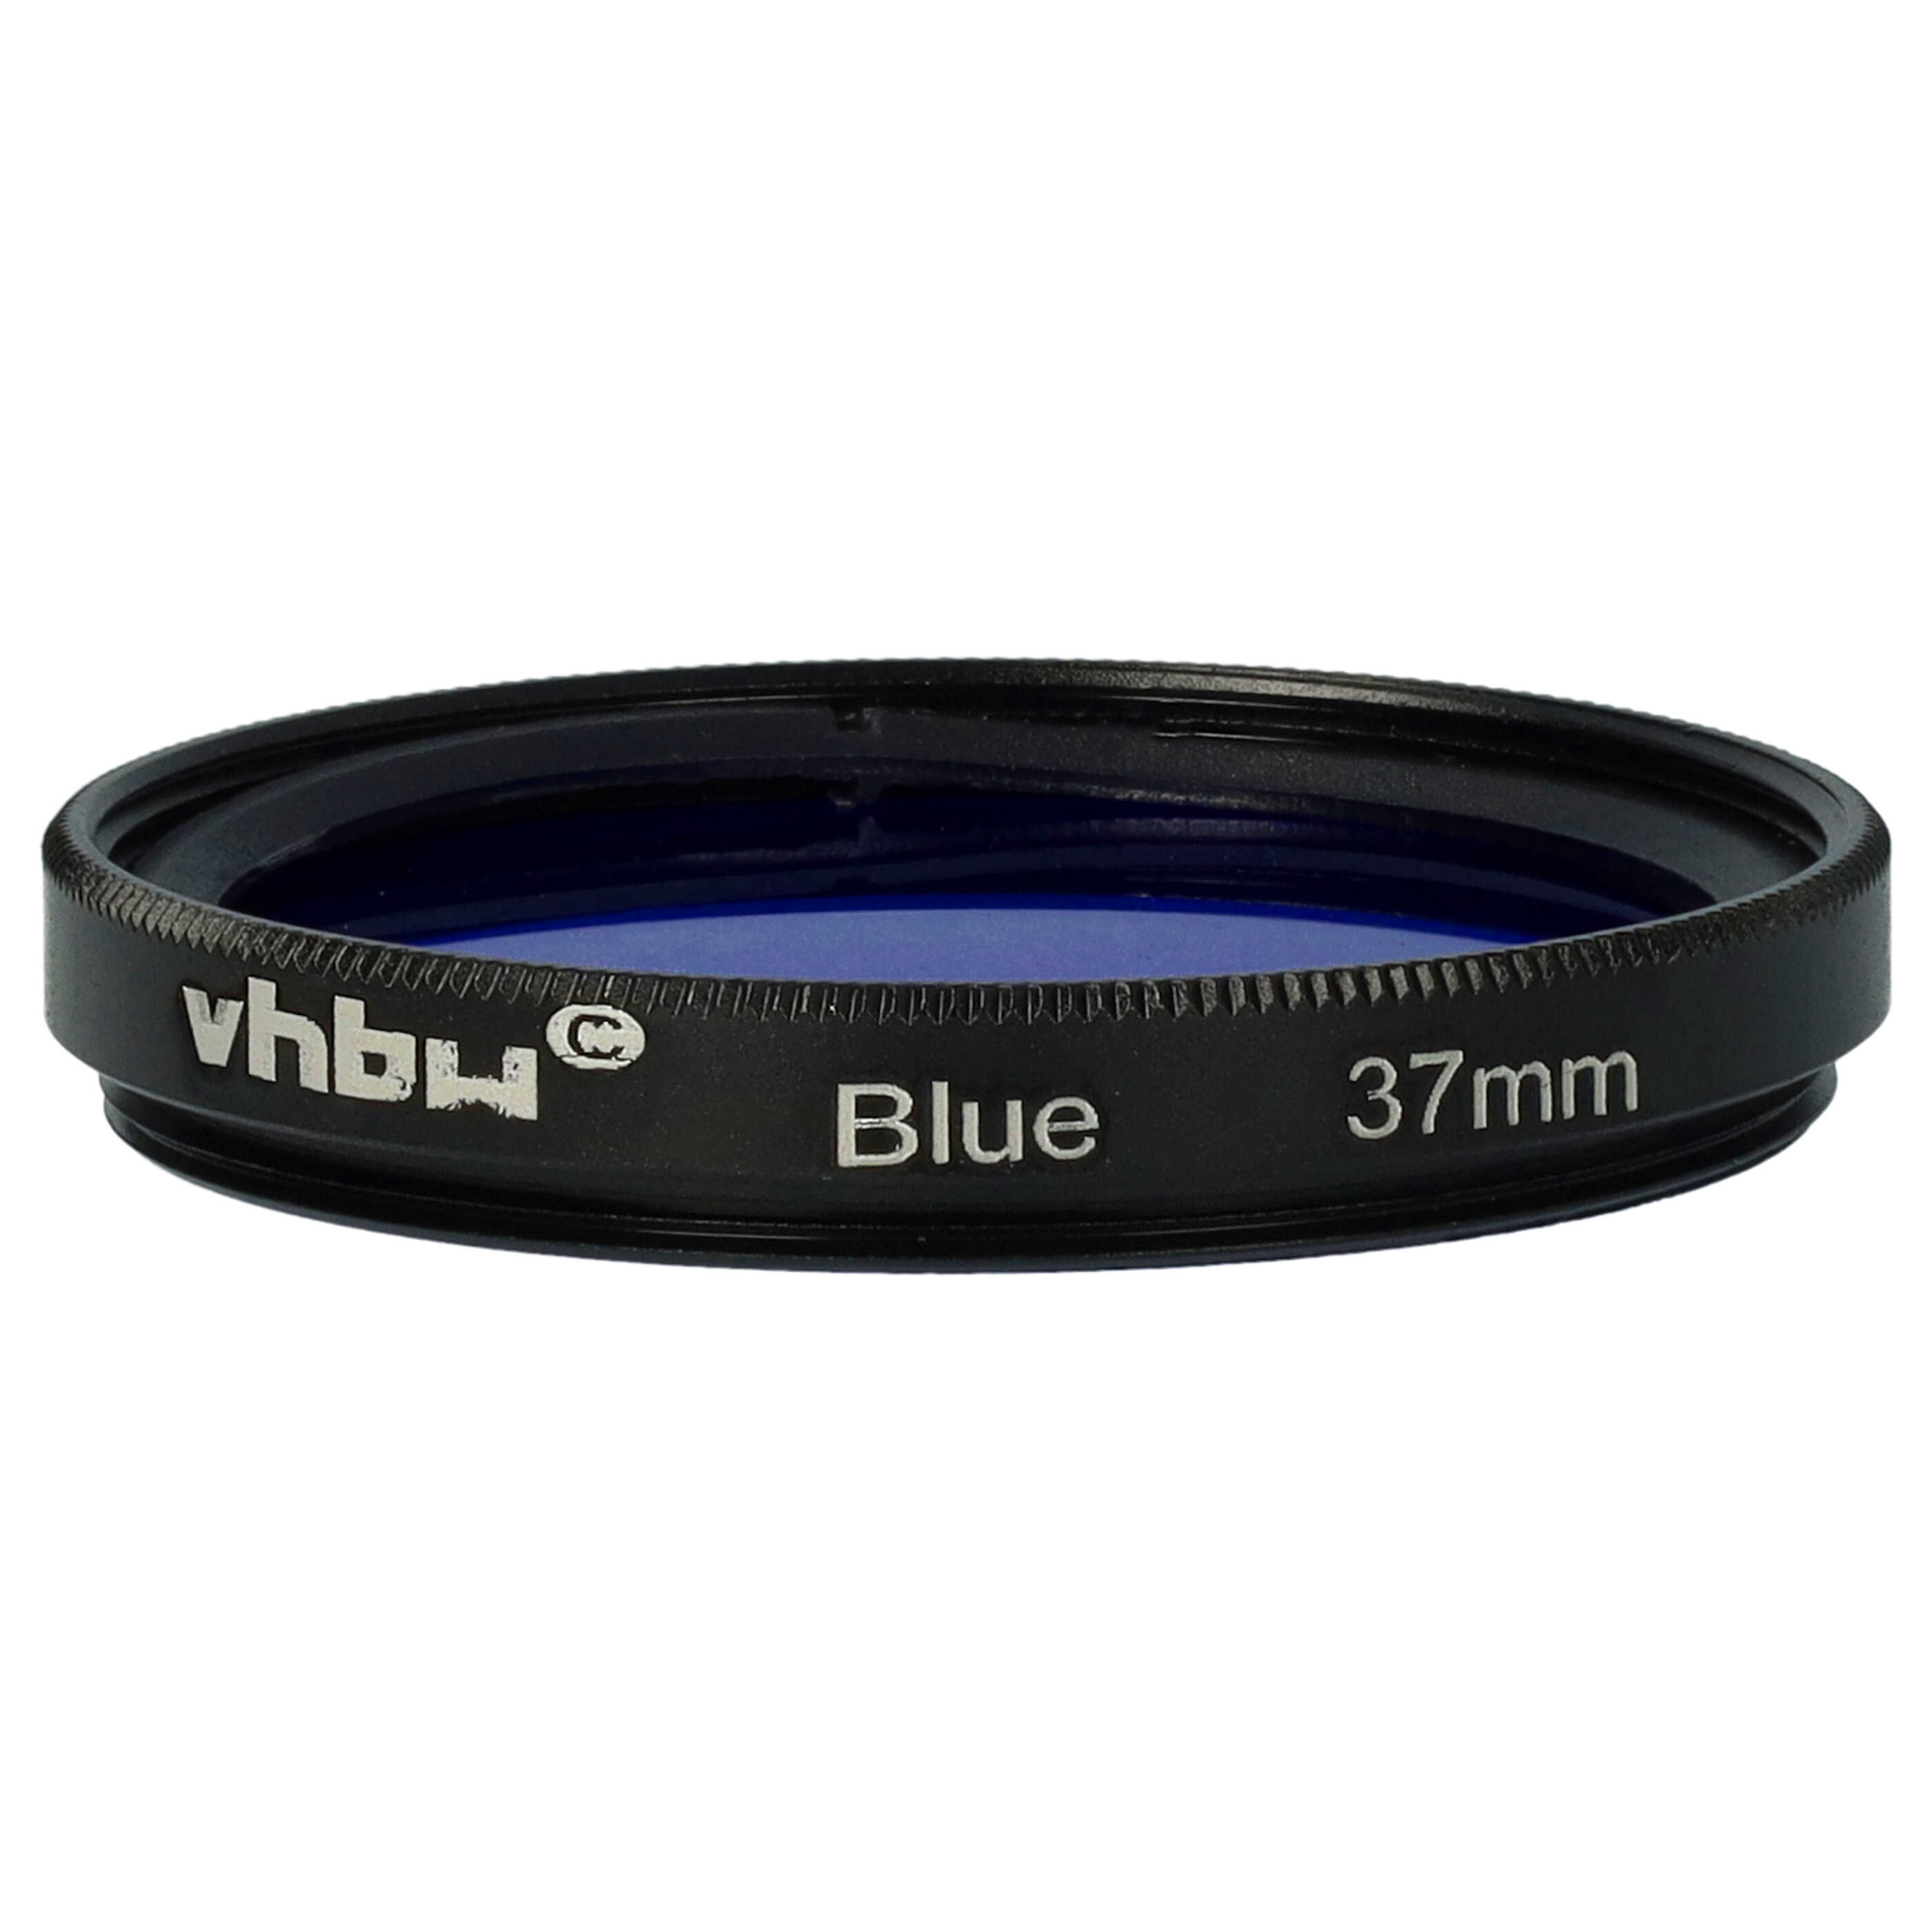 Coloured Filter, Blue suitable for Camera Lenses with 37 mm Filter Thread - Blue Filter